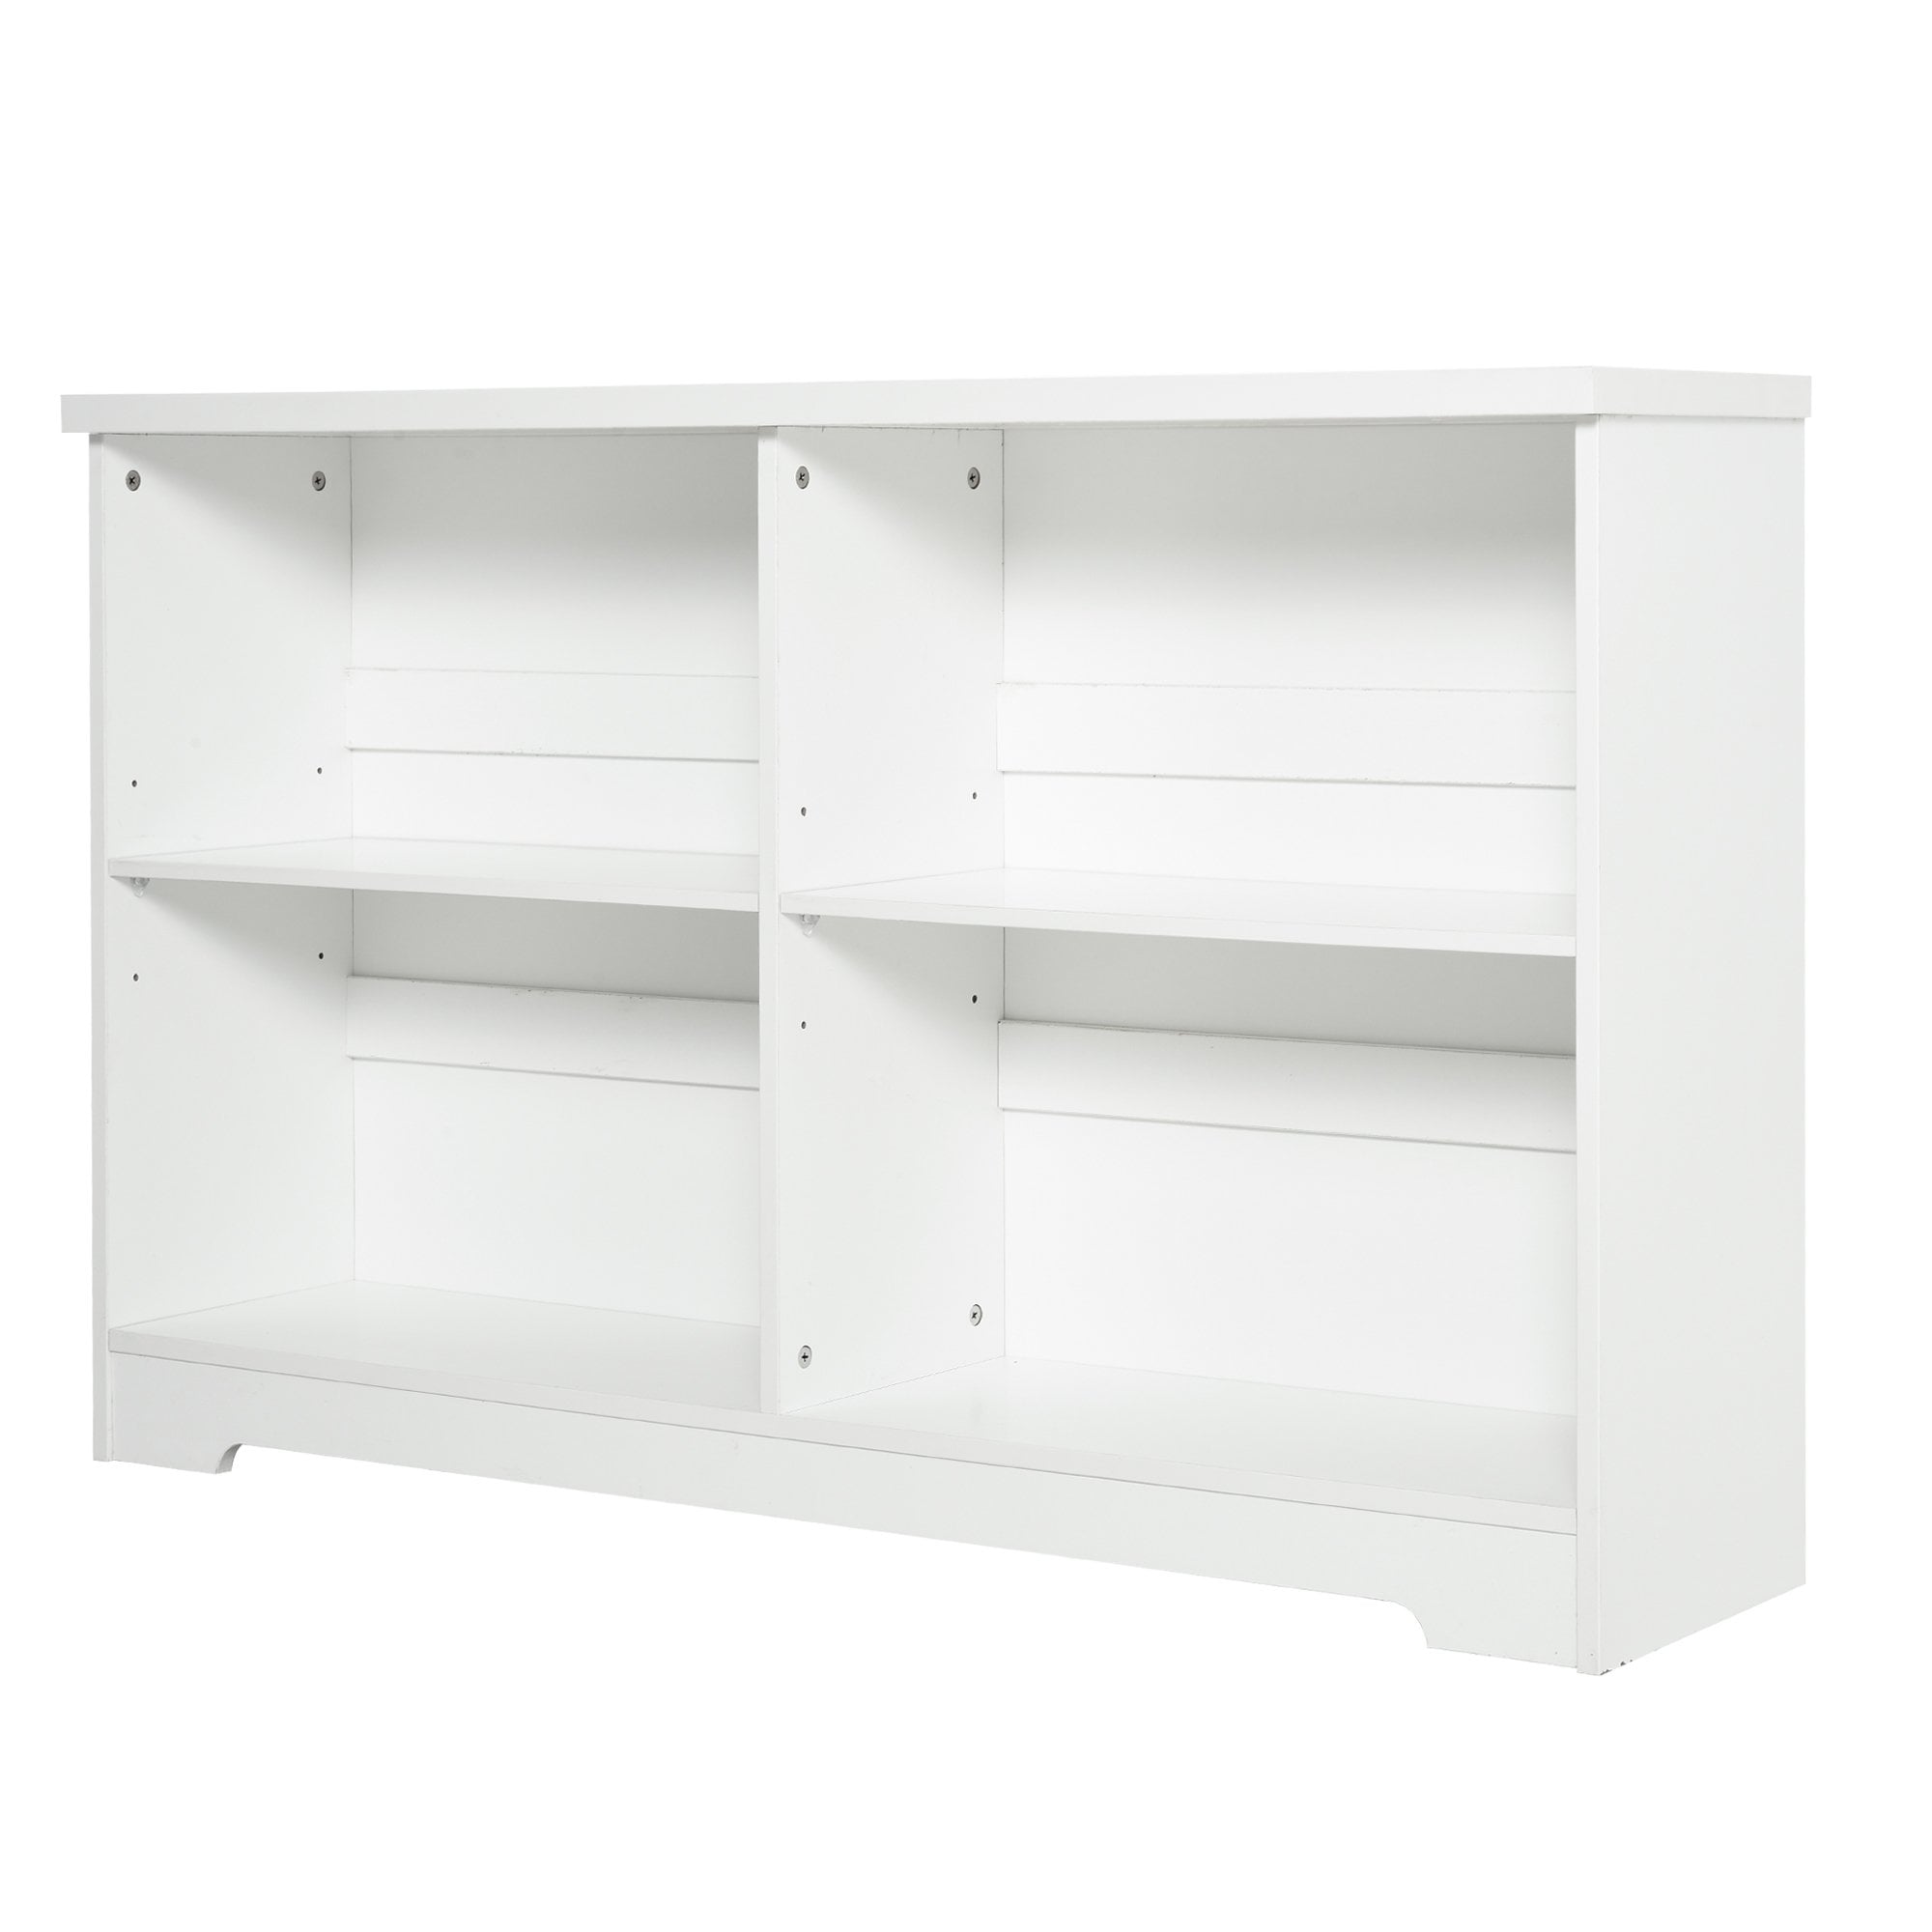 Contemporary 2-Tier Low Bookcase - Wooden 4 Cube Shelving Display Storage Unit Office Living Room Furniture with Adjustable Shelf - White 4-Cube Shelf